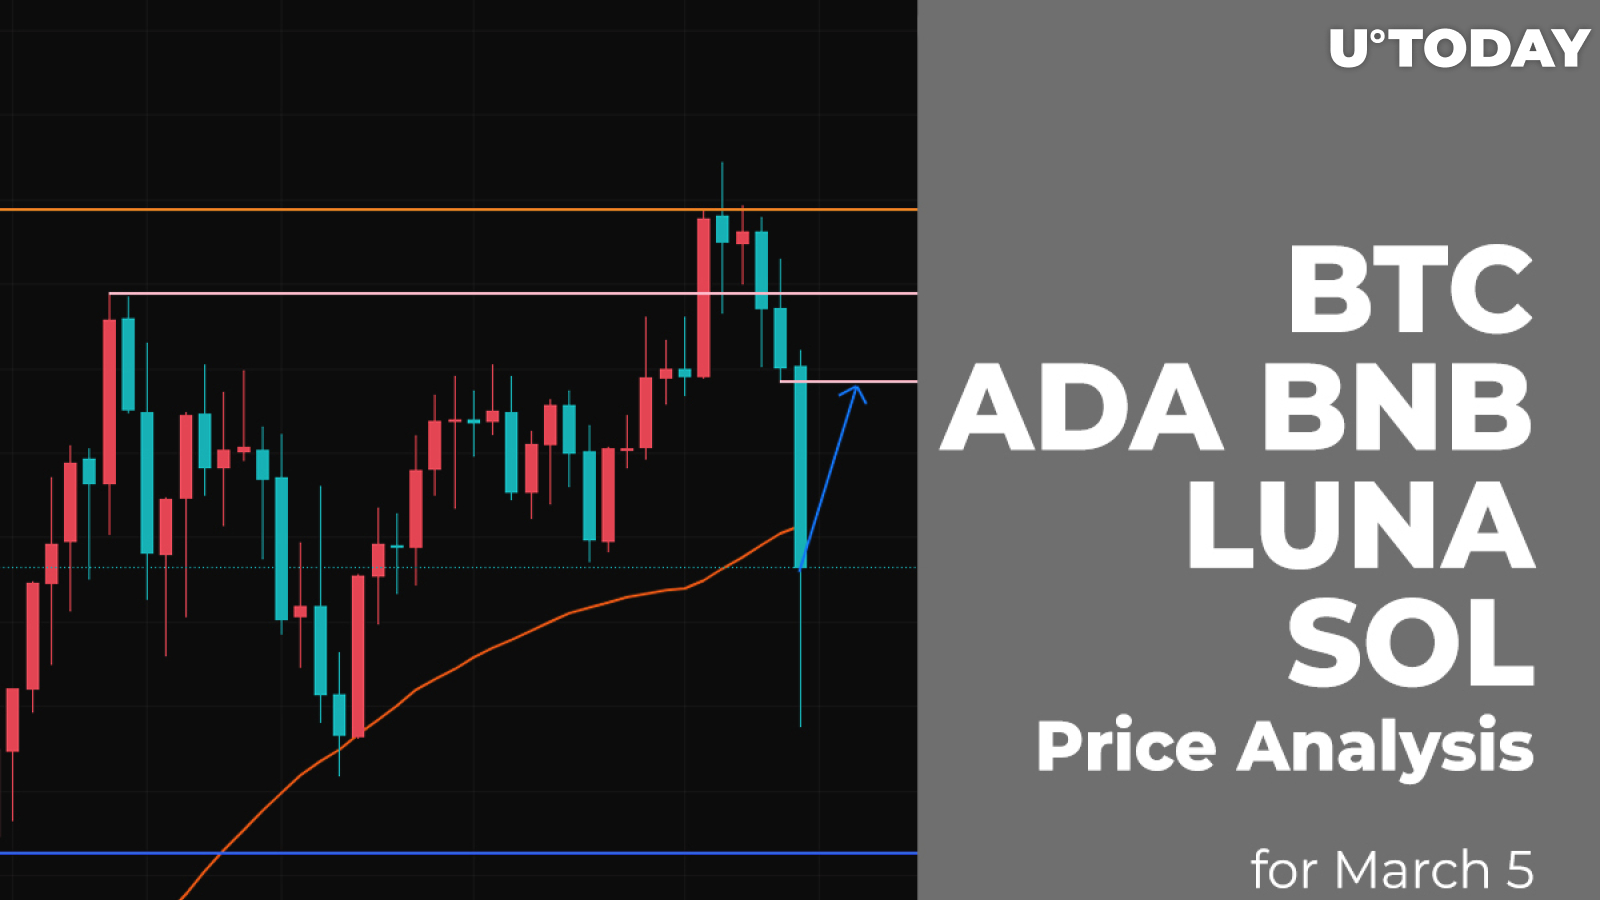 BTC, ADA, BNB, LUNA and SOL Price Analysis for March 5